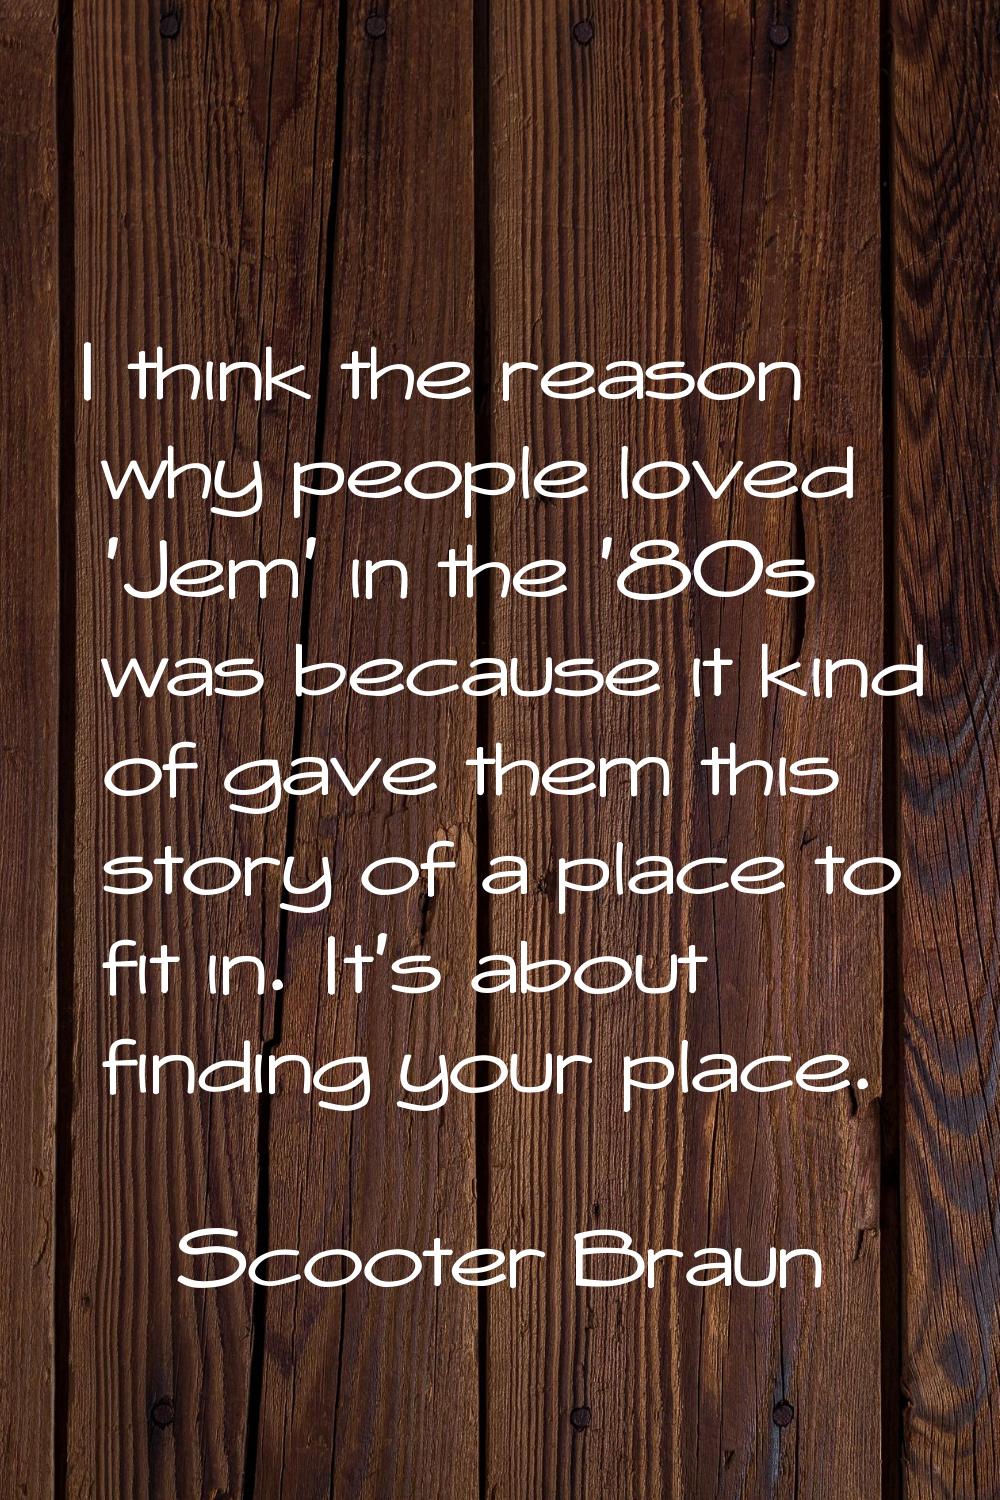 I think the reason why people loved 'Jem' in the '80s was because it kind of gave them this story o